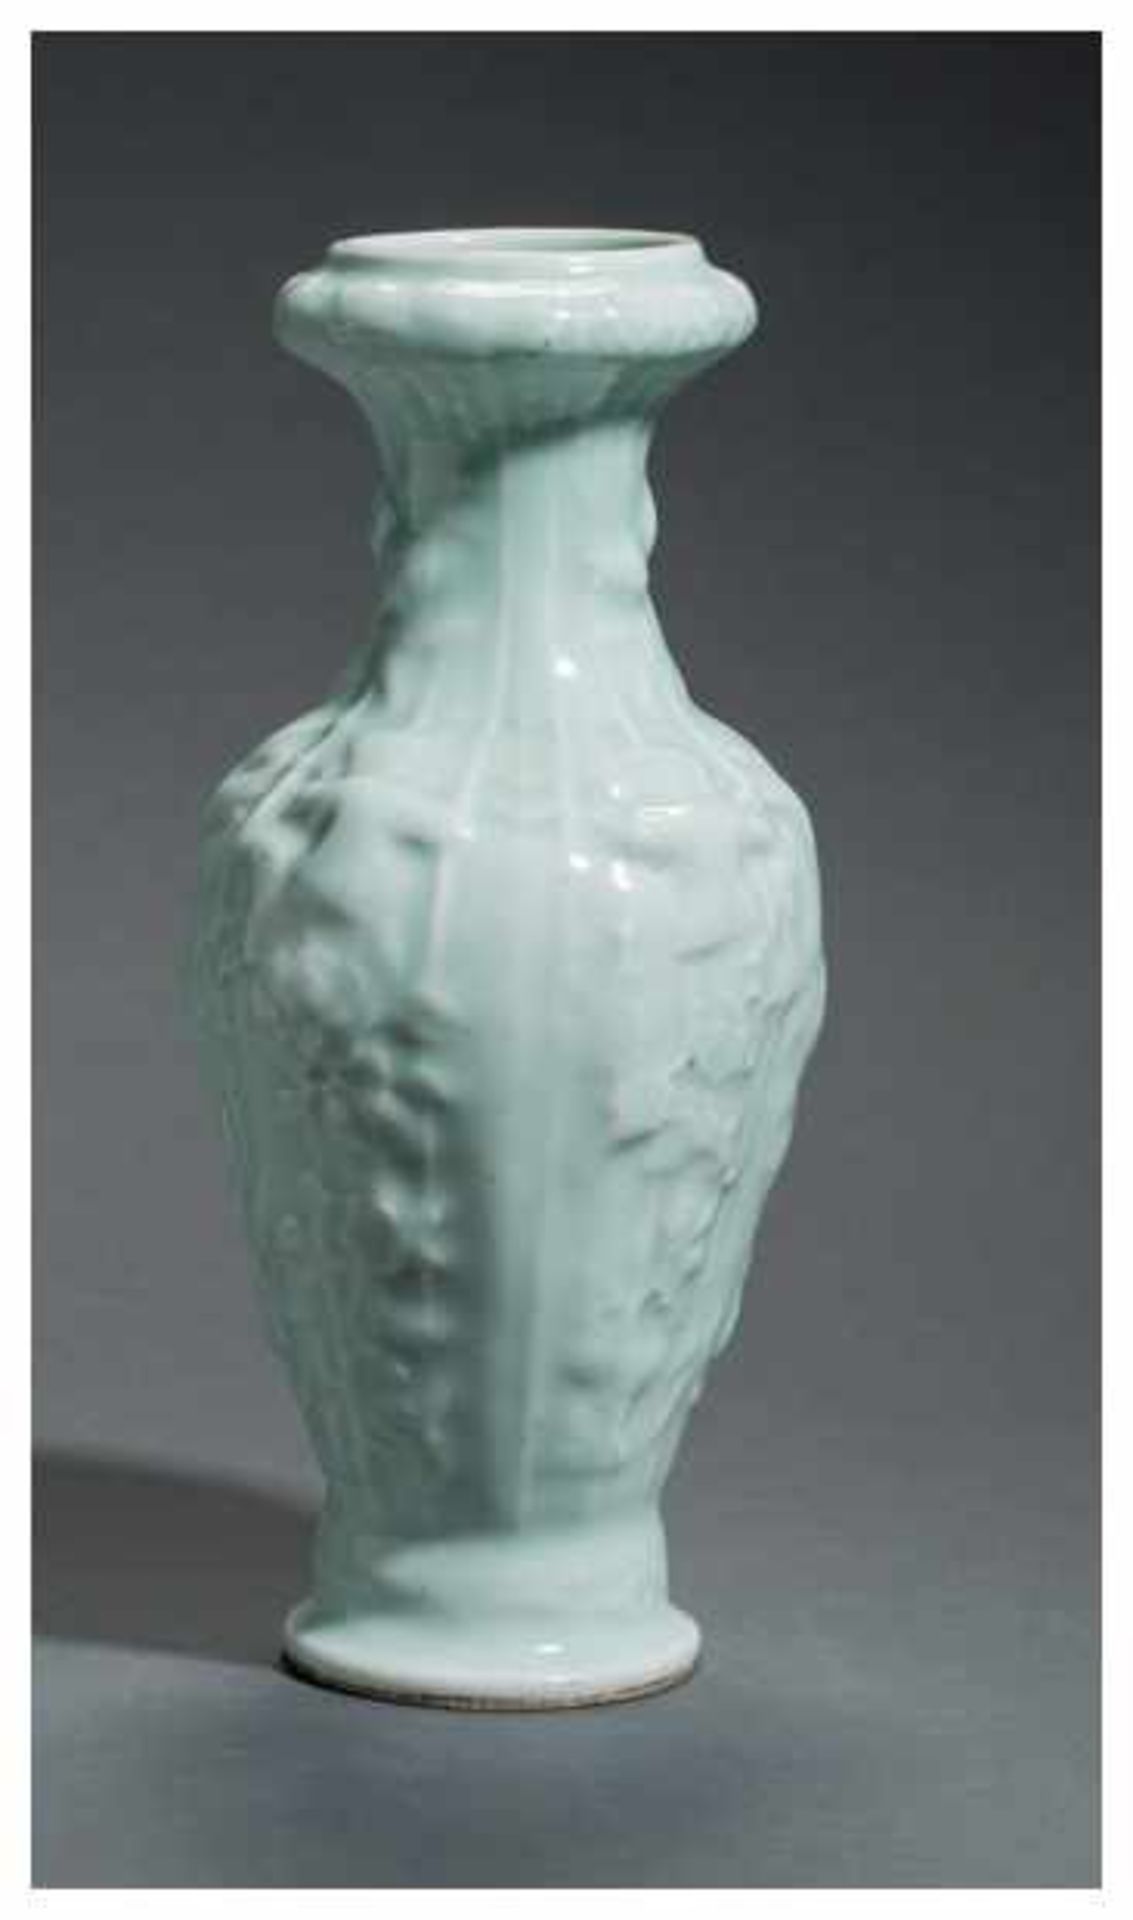 A LONGQUAN GLAZED VASE WITH HIGH RELIEF Glazed ceramic. China, 20th centuryAn attractive and - Image 2 of 3